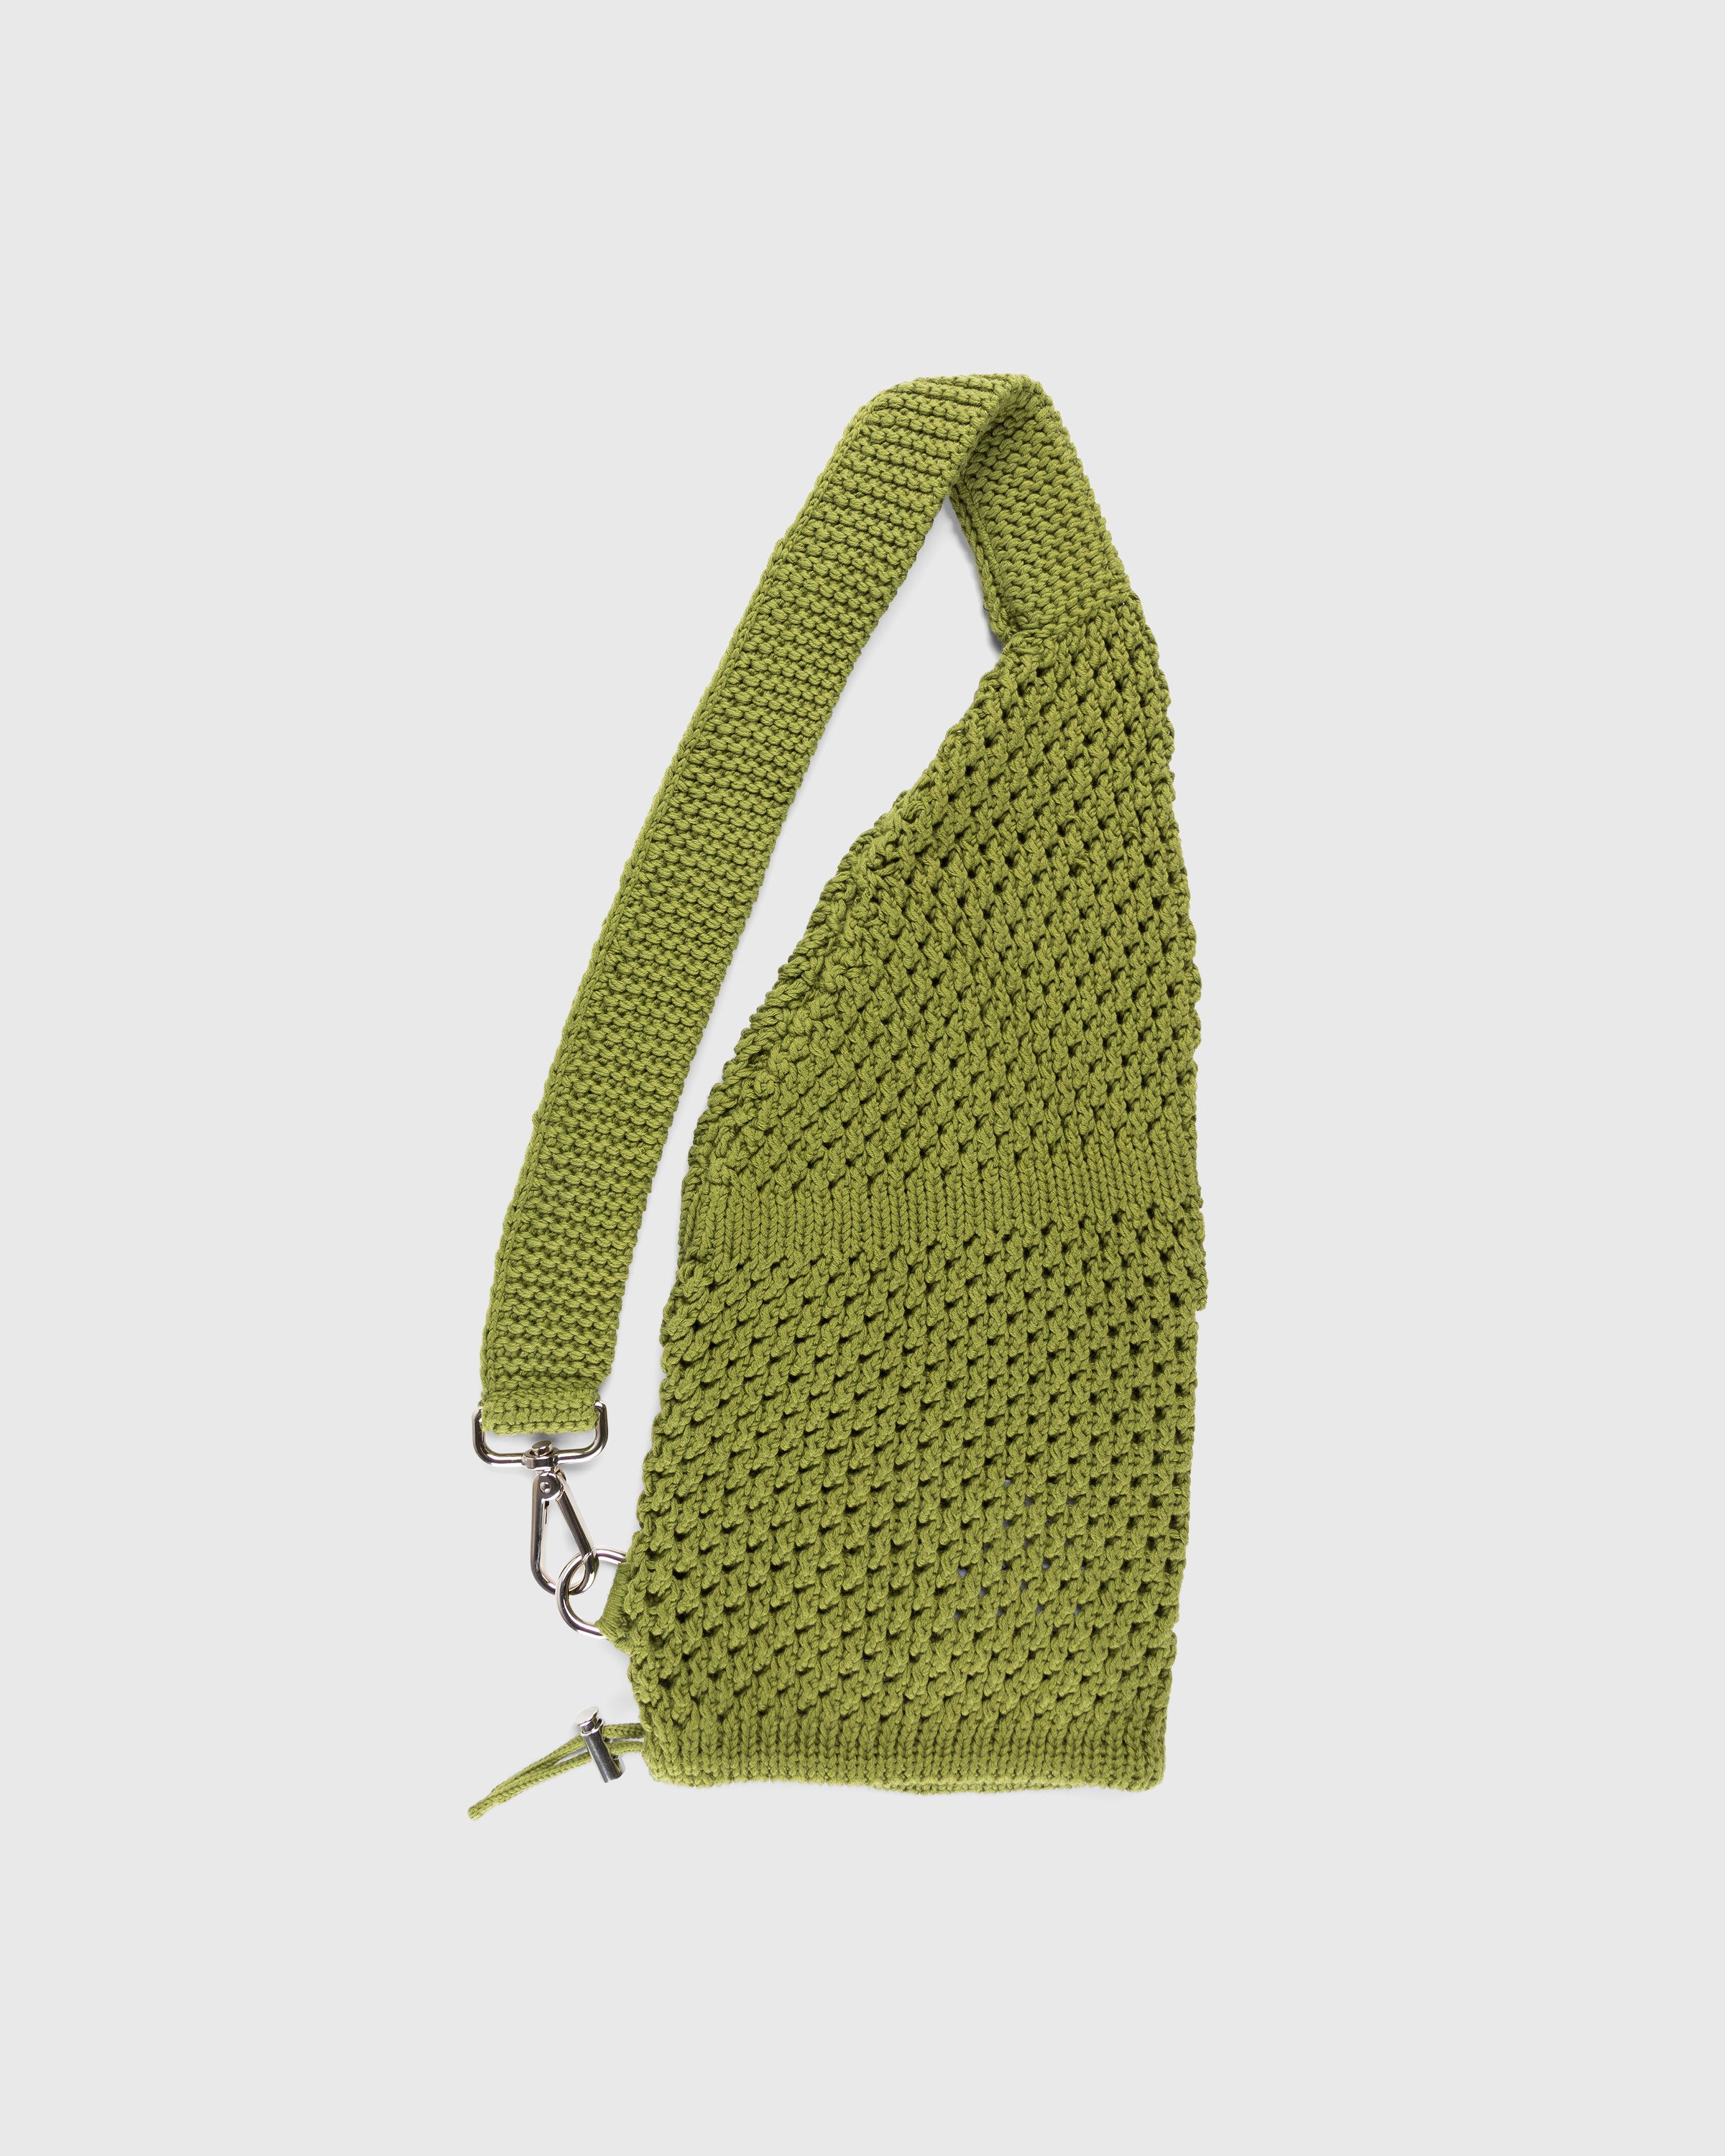 SSU - Mesh Stitch Knitted Bag Olive Green - Accessories - Green - Image 2